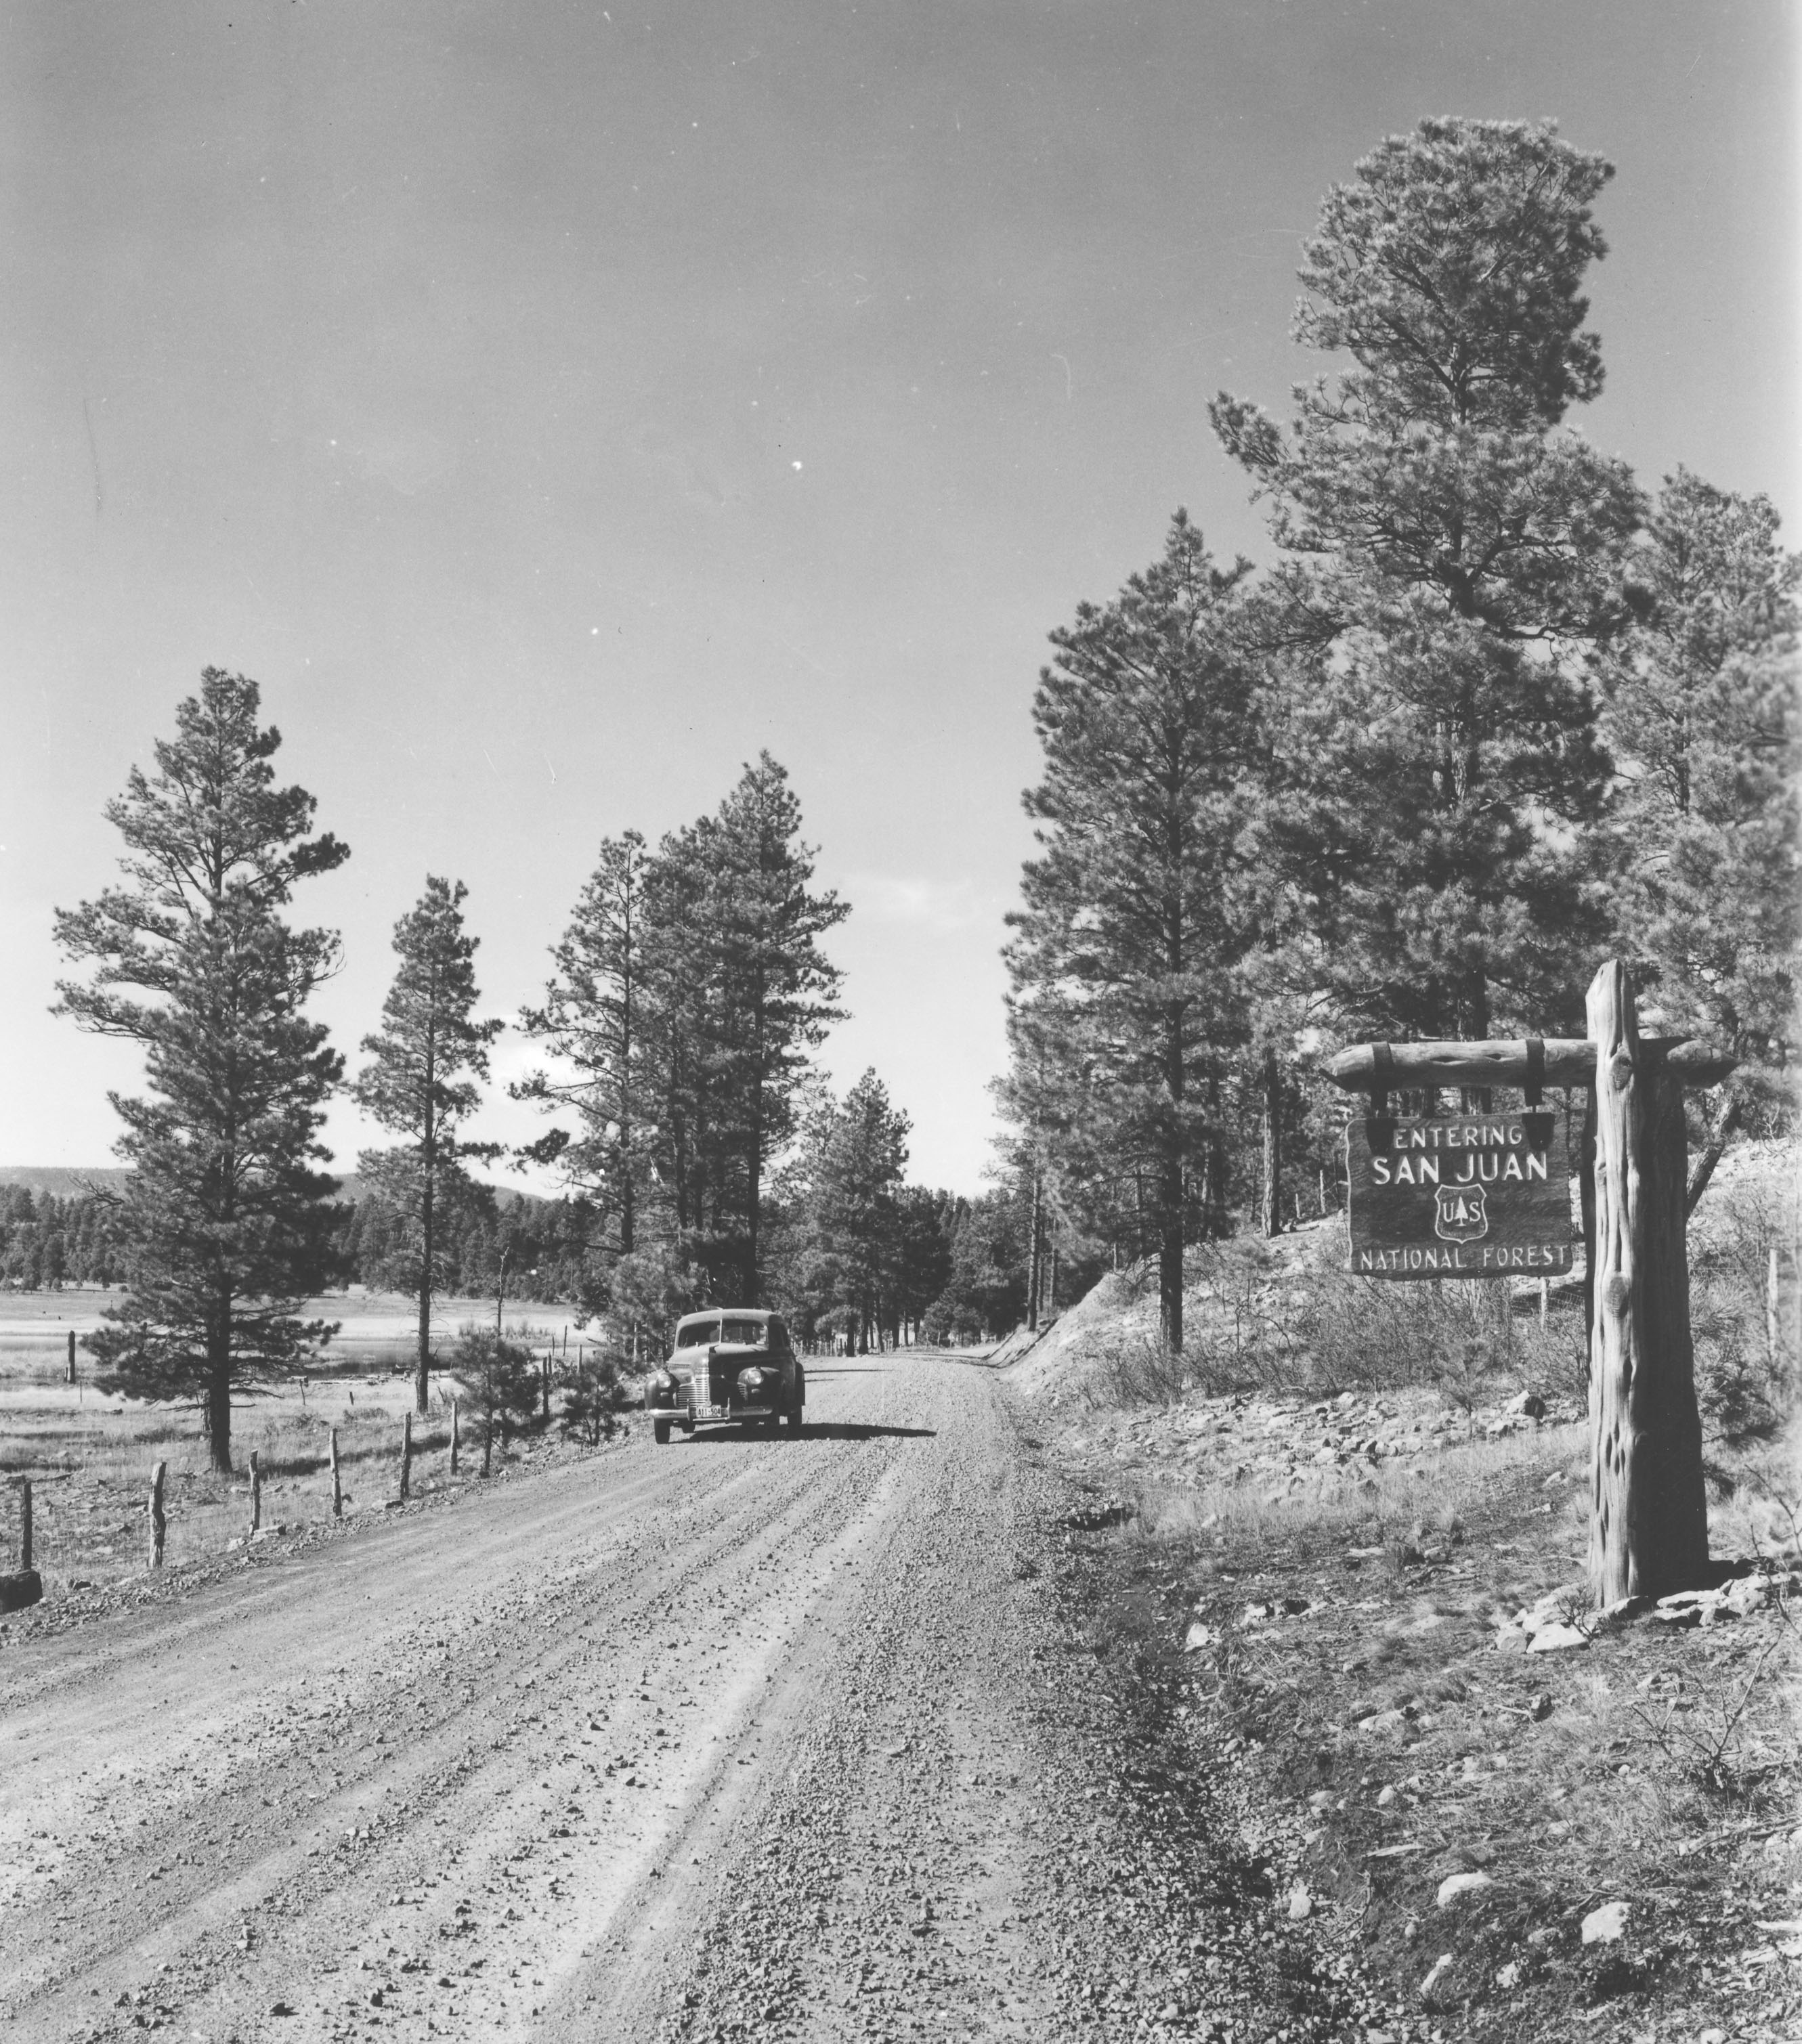 Thumbnail for "San Juan National Forest, United States Forest Service Historic Records Collection" collection